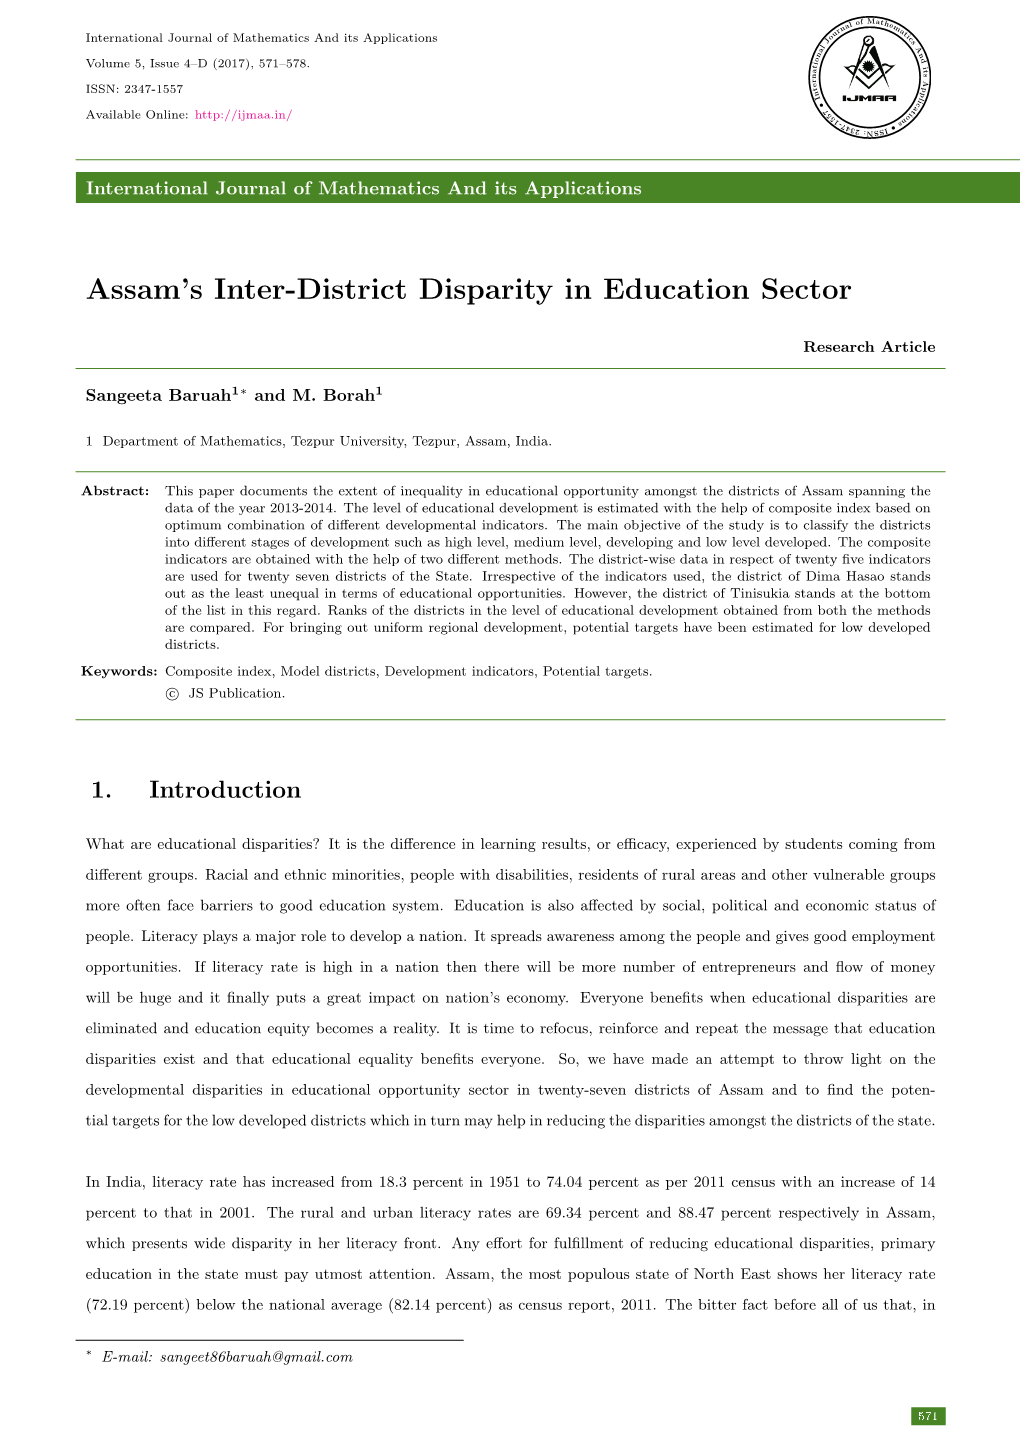 Assam's Inter-District Disparity in Education Sector